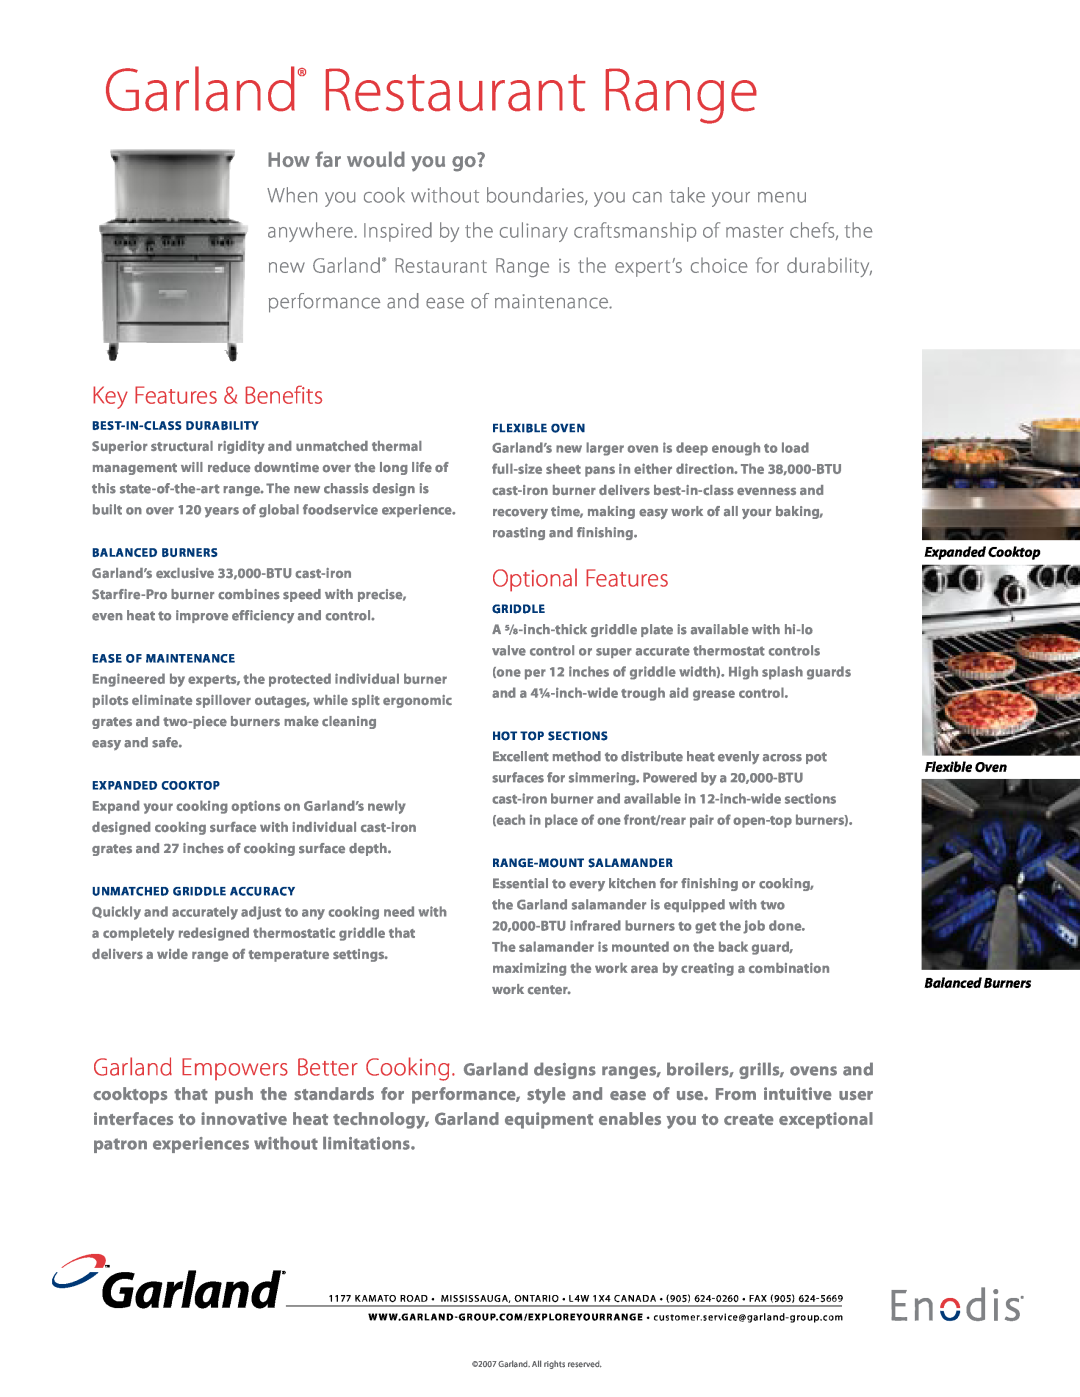 Garland TM Garland Restaurant Range, Key Features & Benefits, Optional Features, How far would you go?, Expanded Cooktop 